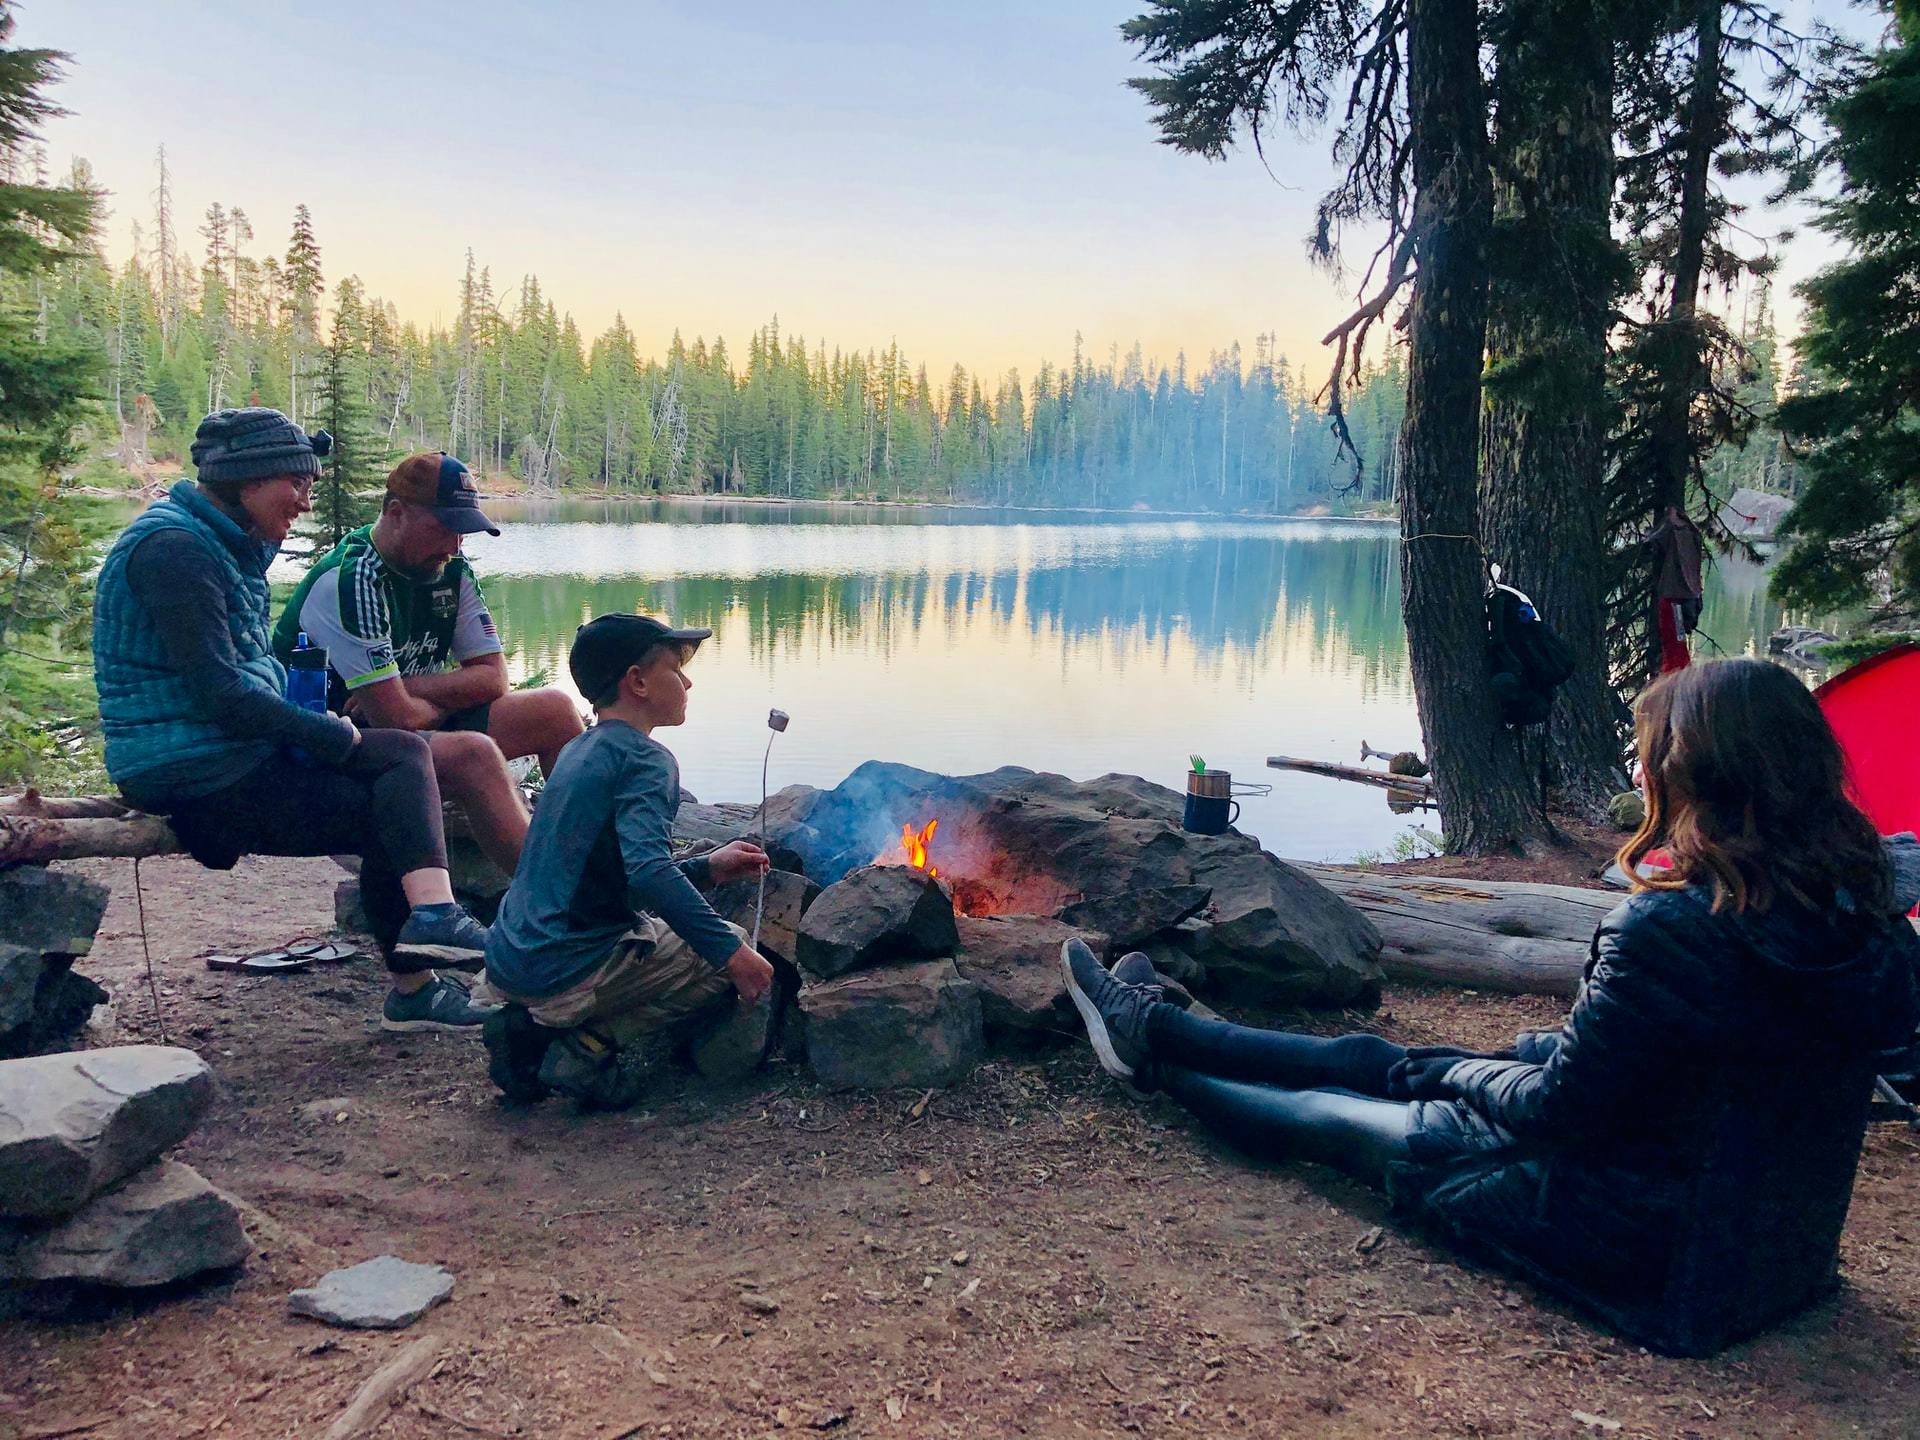 A family around a firepit near a lake. The boy is roasting a marshmellow.